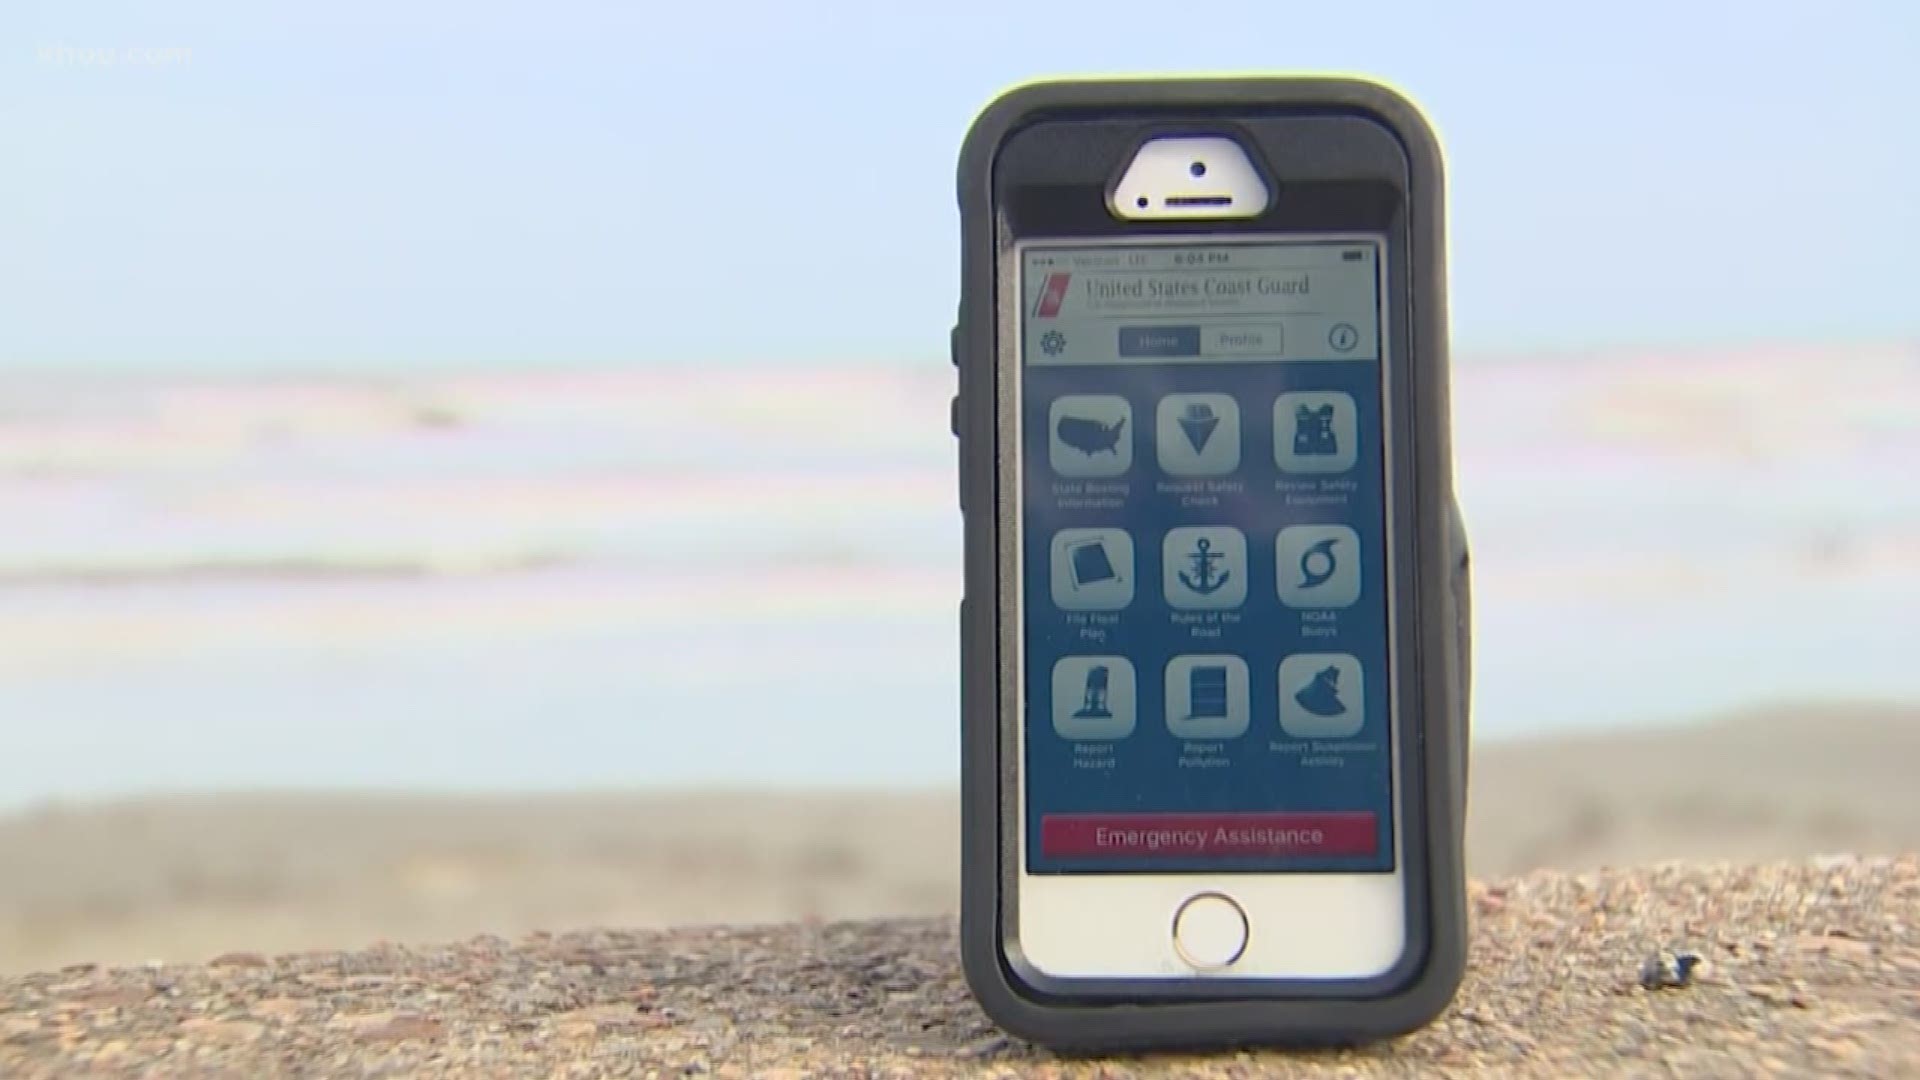 There are ways you can stay safe if you’re heading out on the water. The Coast Guard recommends downloading its app.